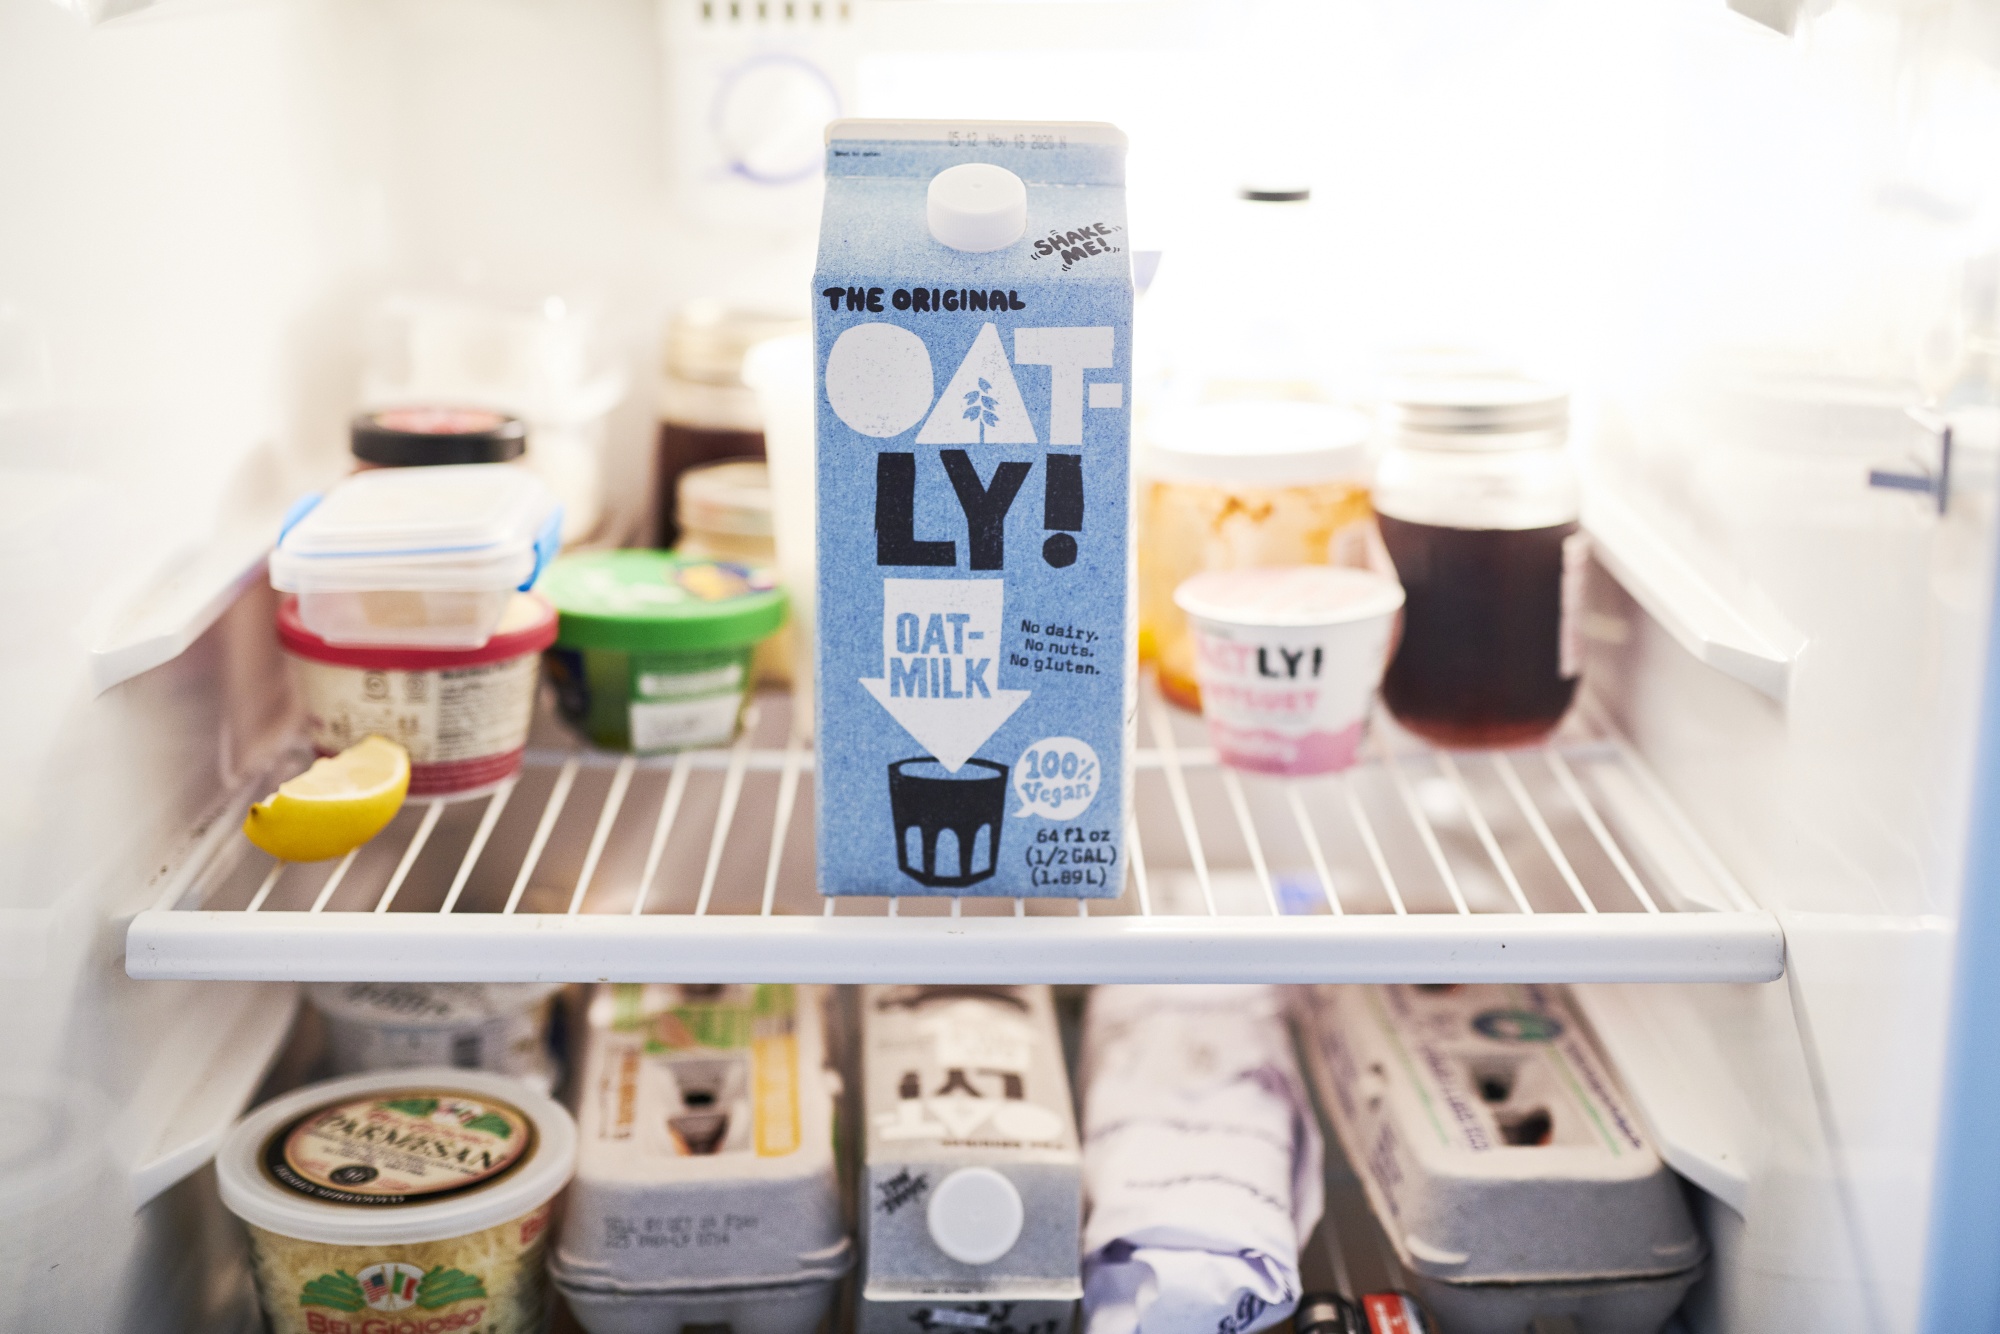 Oatly has gotten a lot of attention in the startup world, but it is hardly alone.